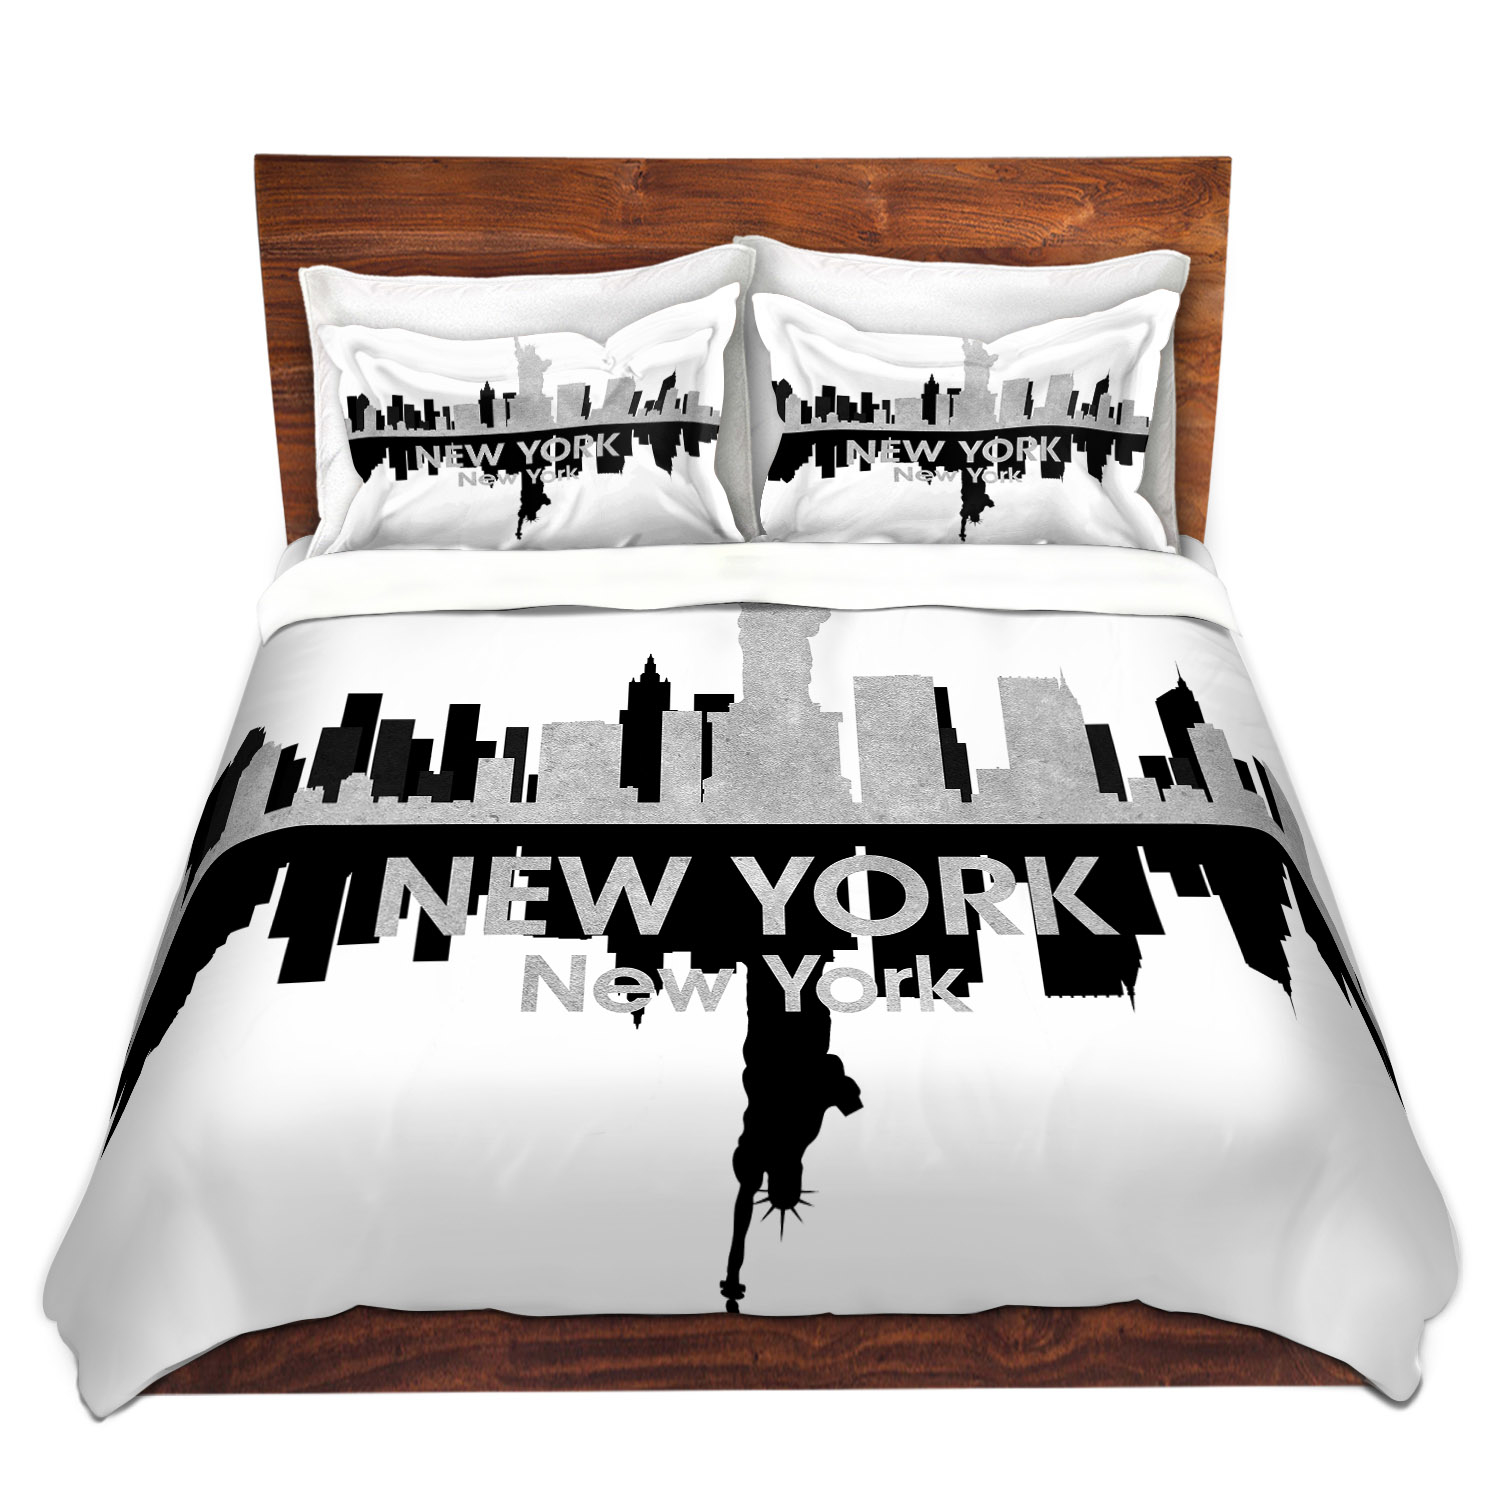 Dianoche Microfiber Duvet Covers By Angelina Vick - City Iv New York New York